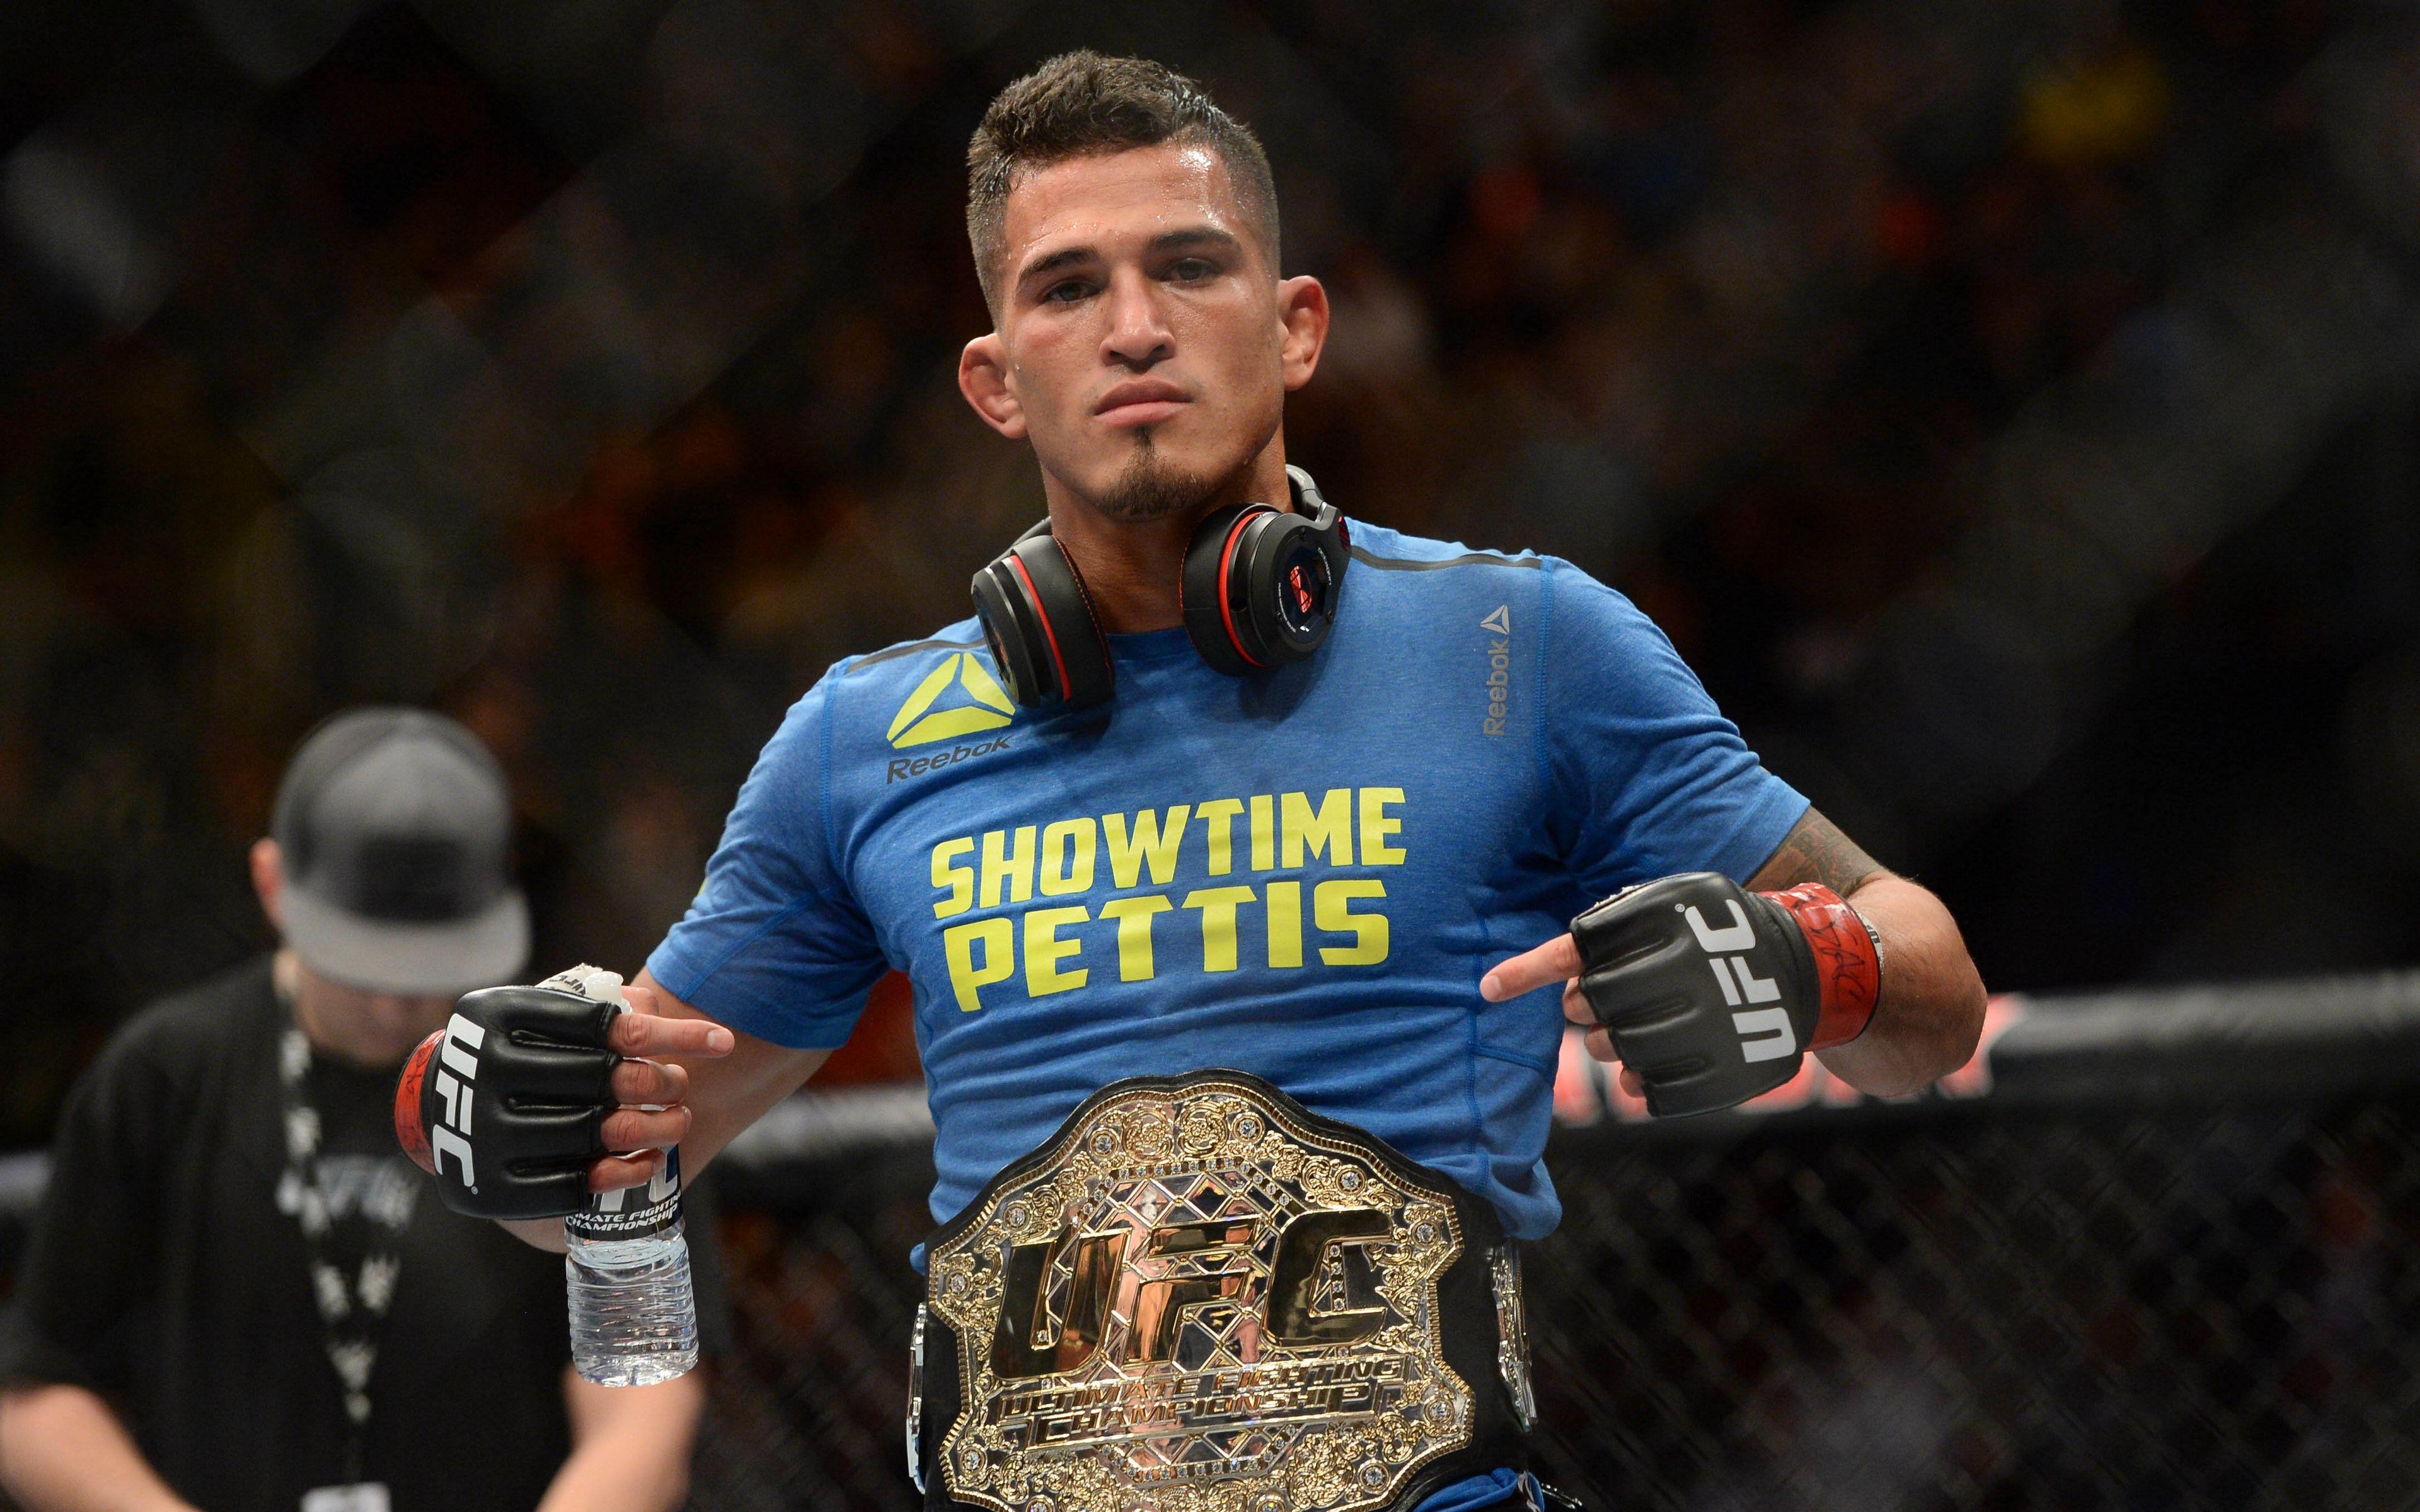 Download wallpaper 3840x2400 anthony pettis, mma, ufc, fighter 4k